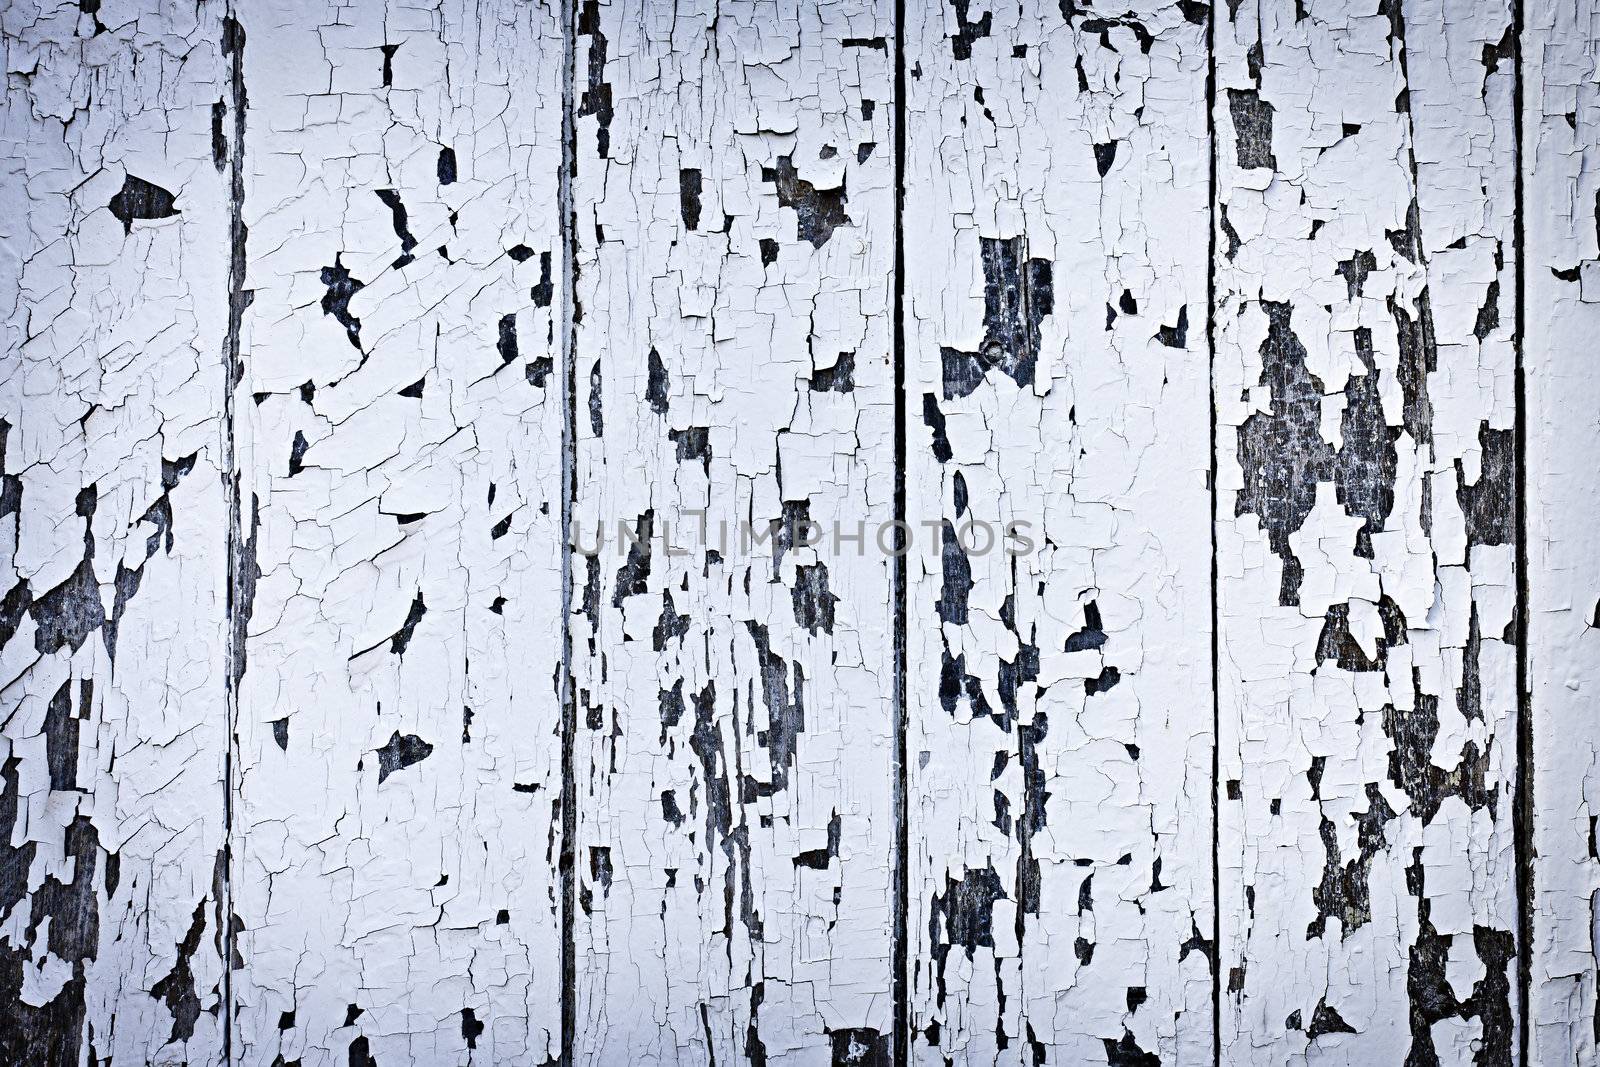 Background of old wood boards with peeling paint